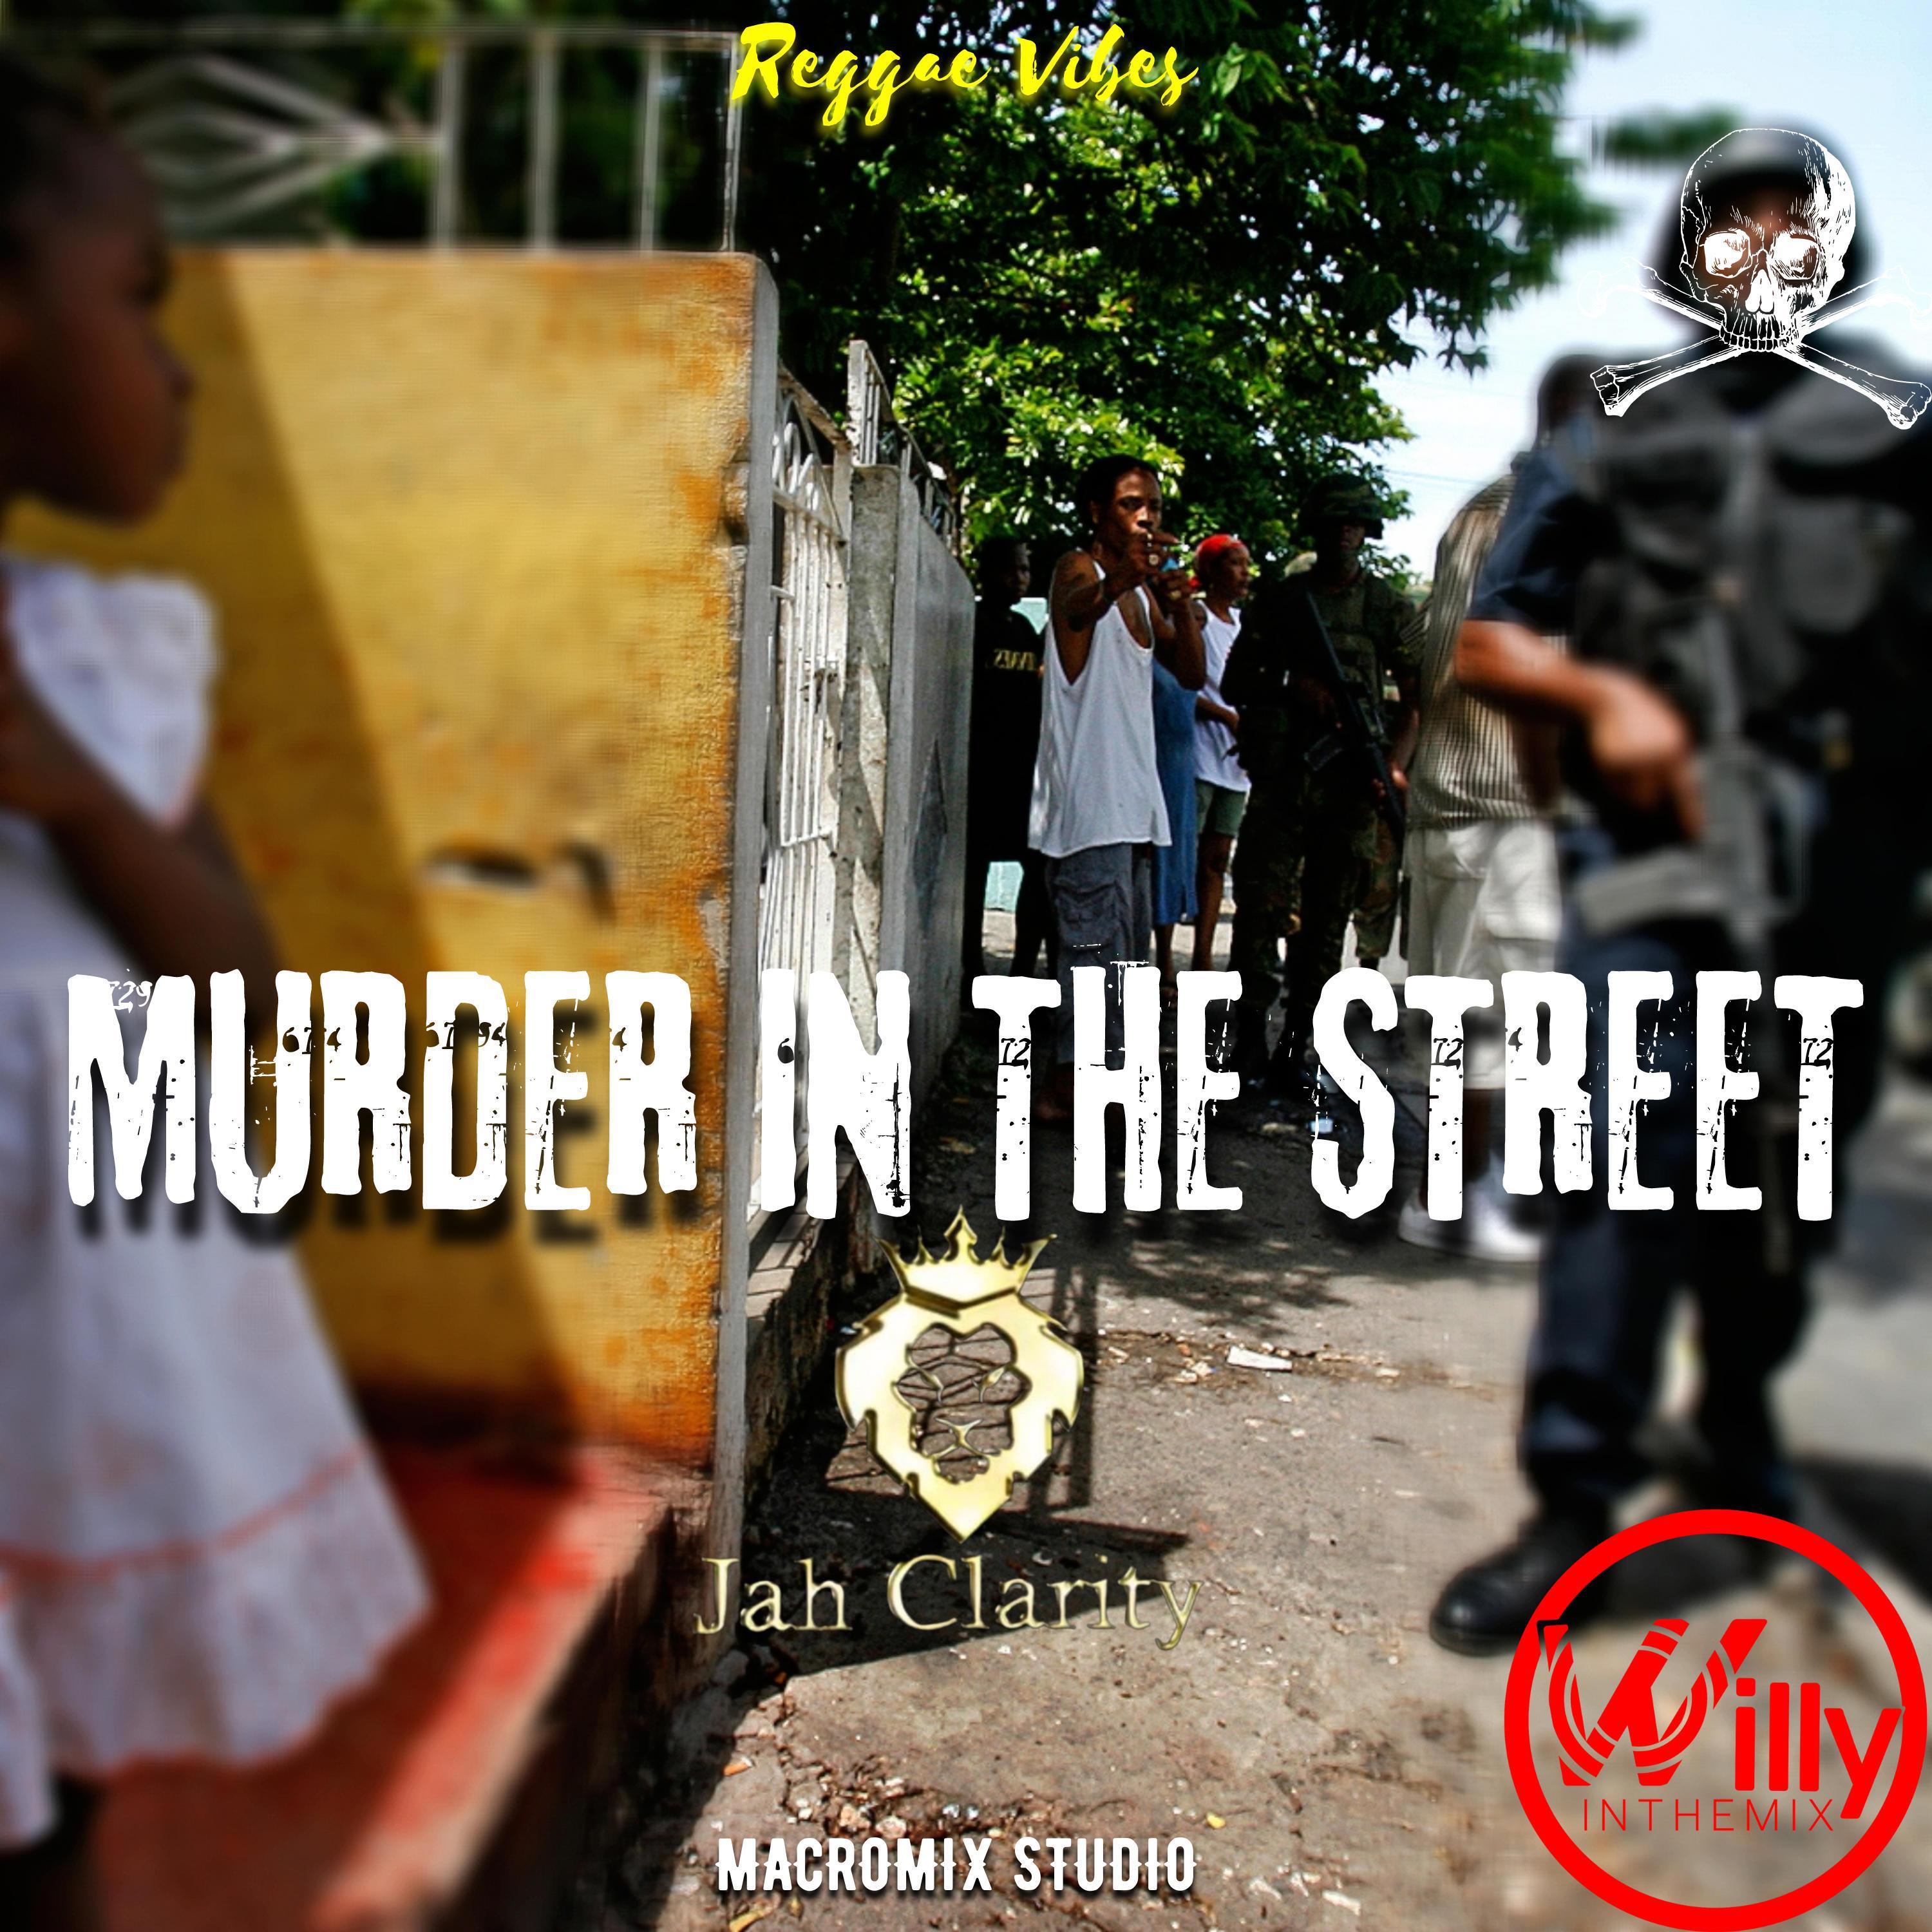 DjWillyintheMix - Murder In The Street (feat. Jah Clarity)